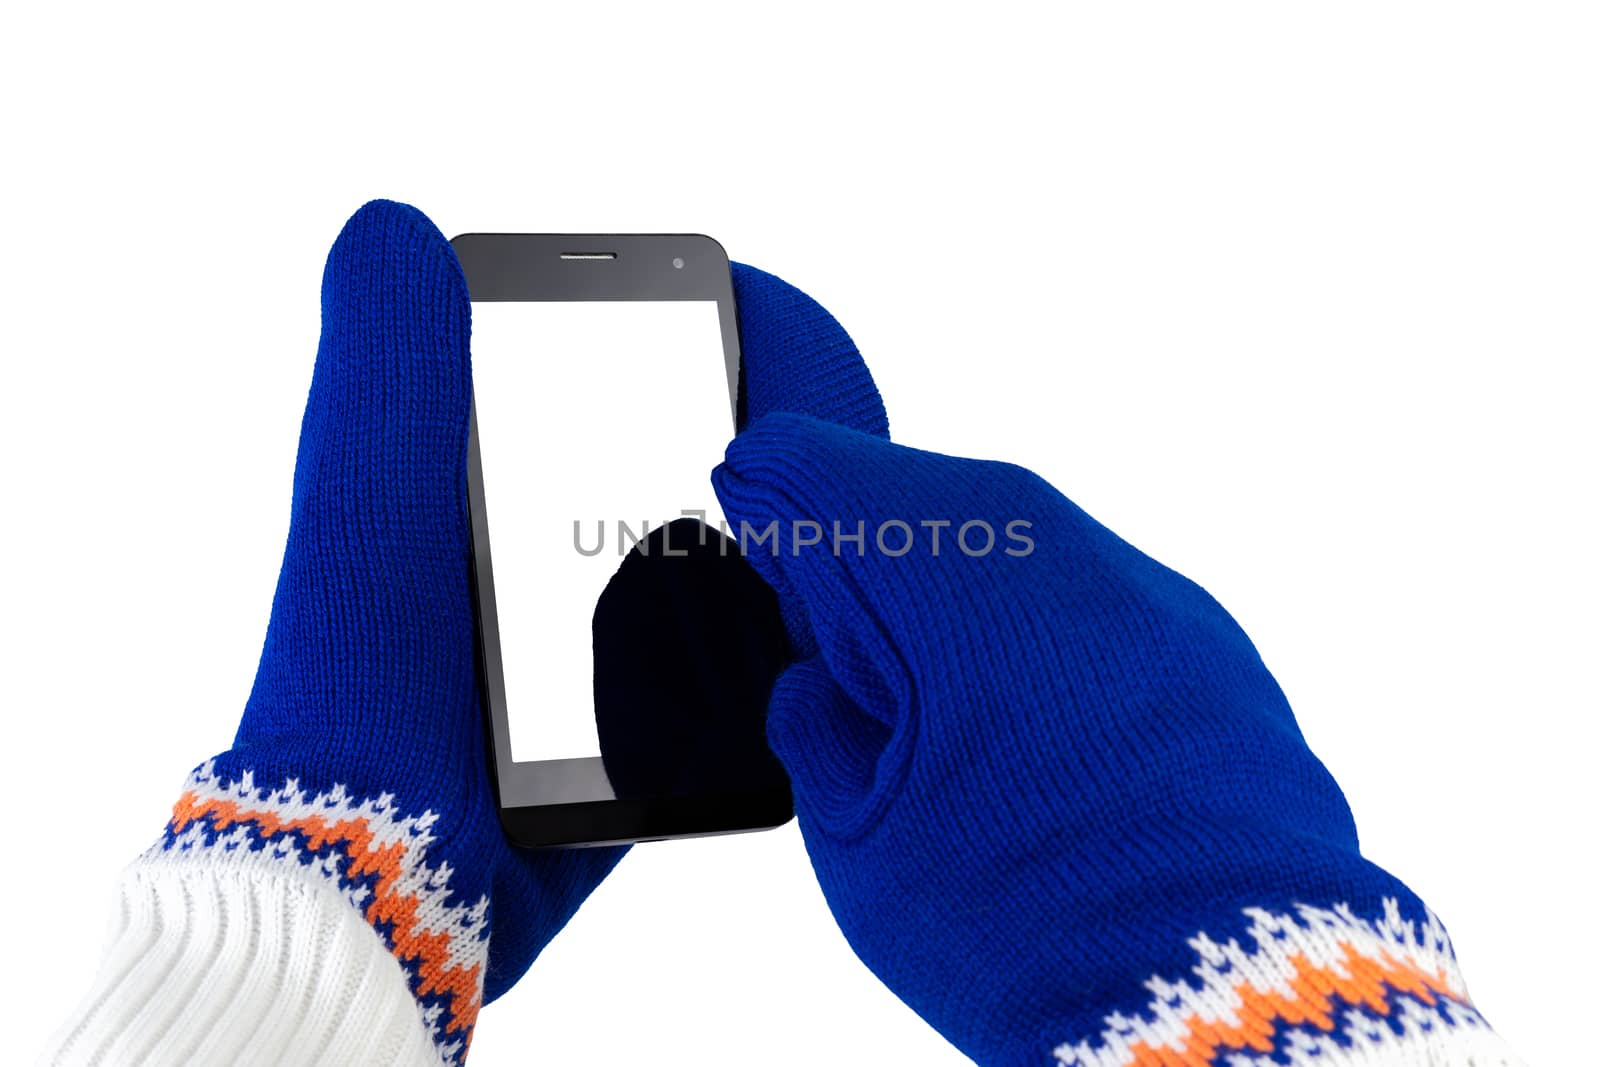 cellphone with white-blue mittens isolated on white background.